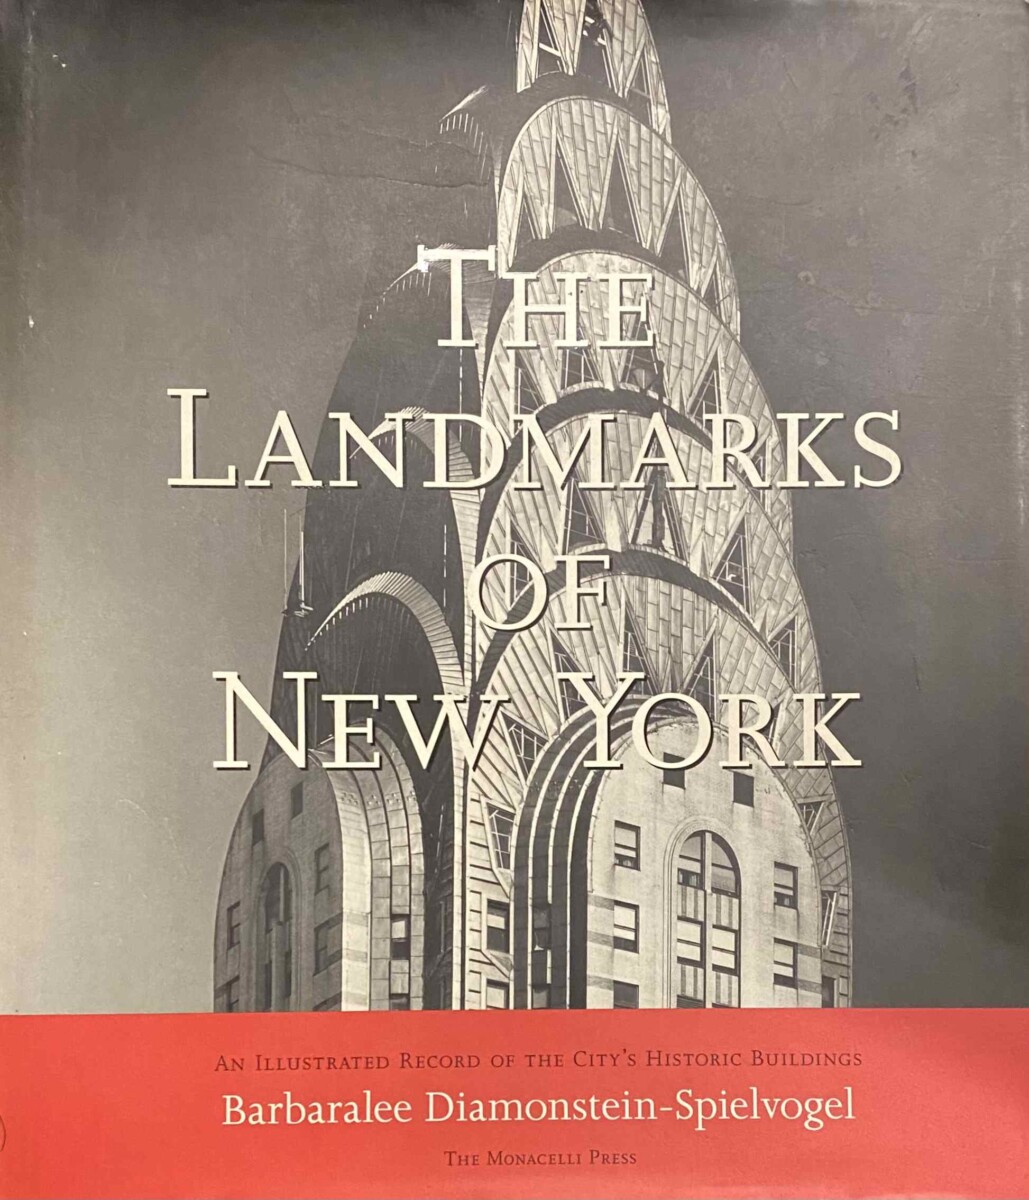 The Landmarks of New York. An Illustrated Record of the City's Historic Buildings - Diamonstein-Spielvogel, Barbaralee